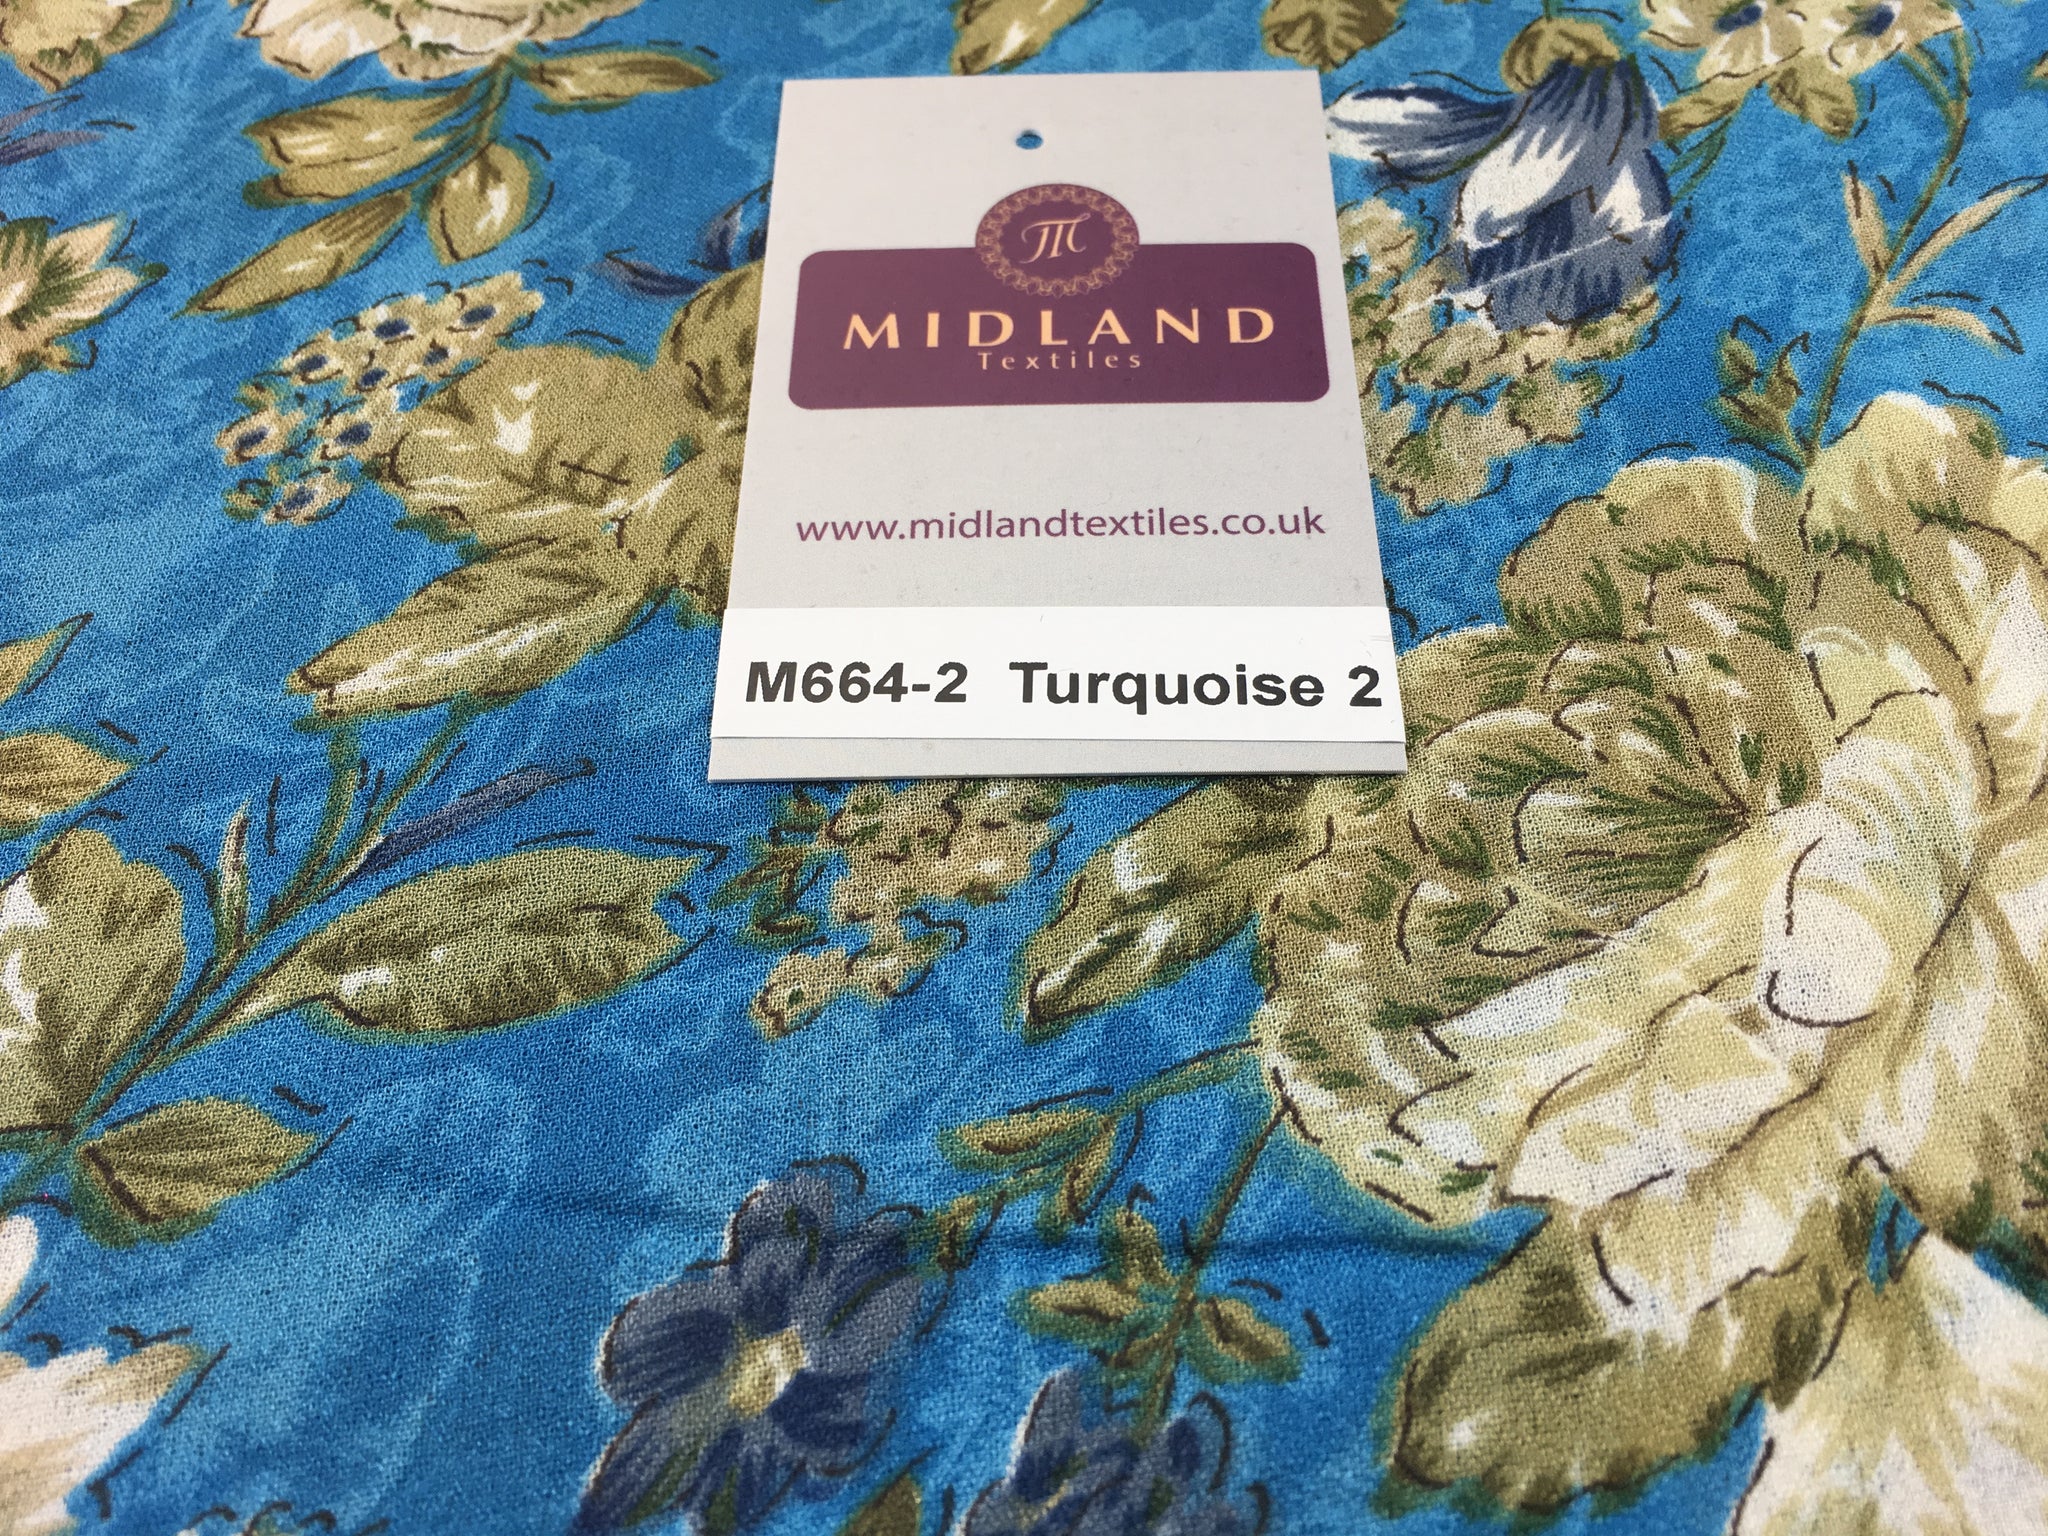 Lightweight Floral Printed Rayon Crepe dress fabric 39" wide M664 - Midland Textiles & Fabric